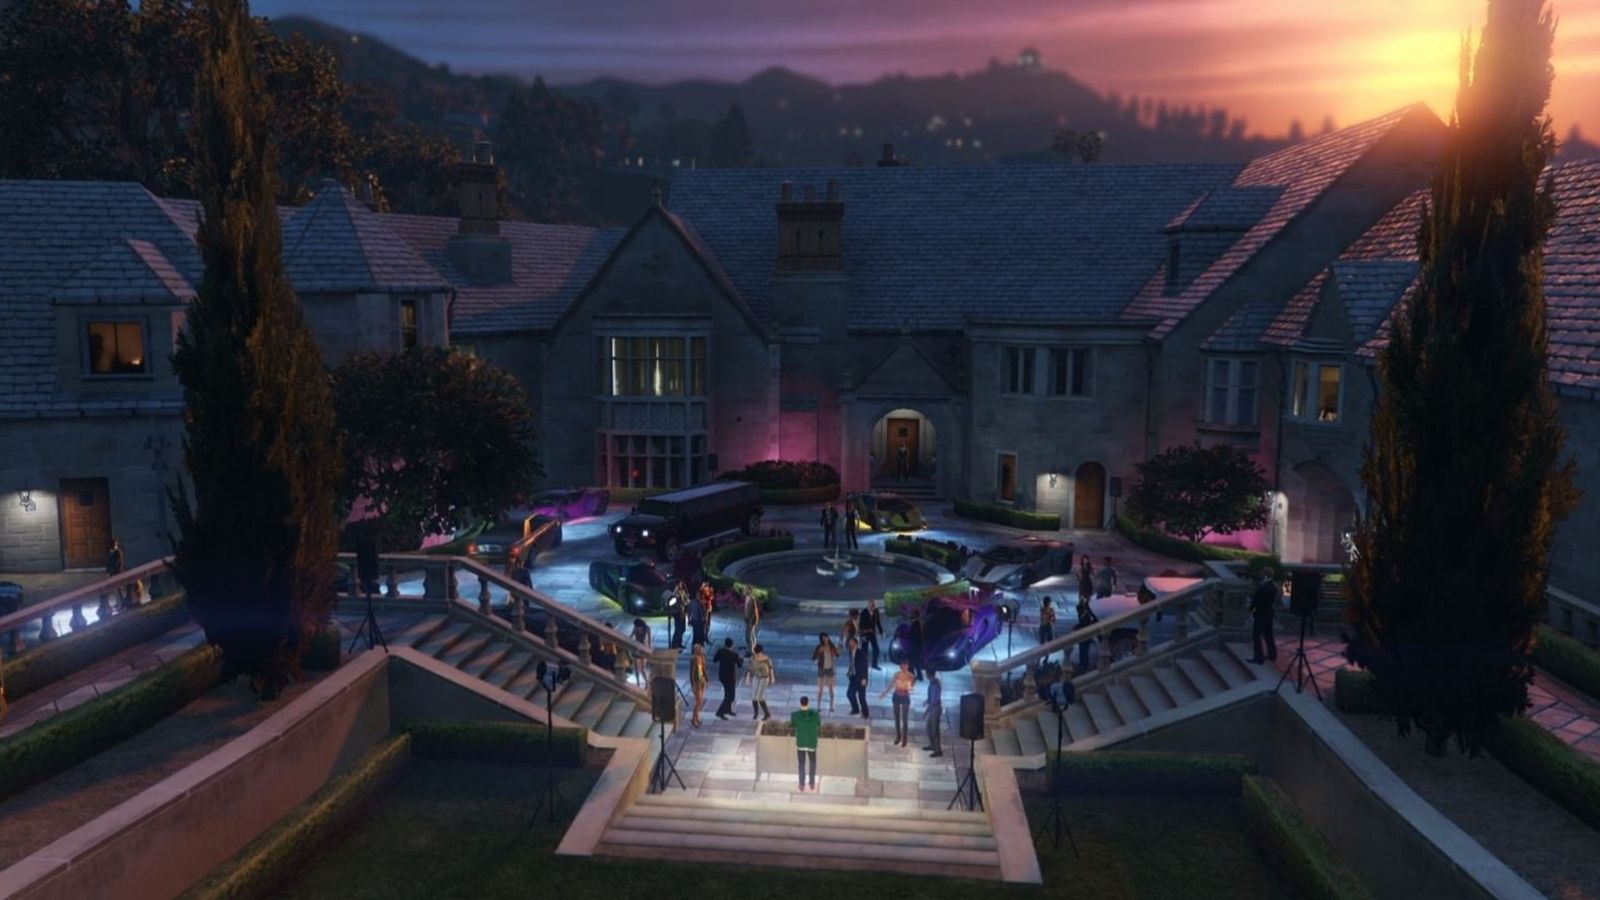 GTA Online The Contract DLC. The image shows many Celebrities partying in the garden of a house in Vinewood Hills.